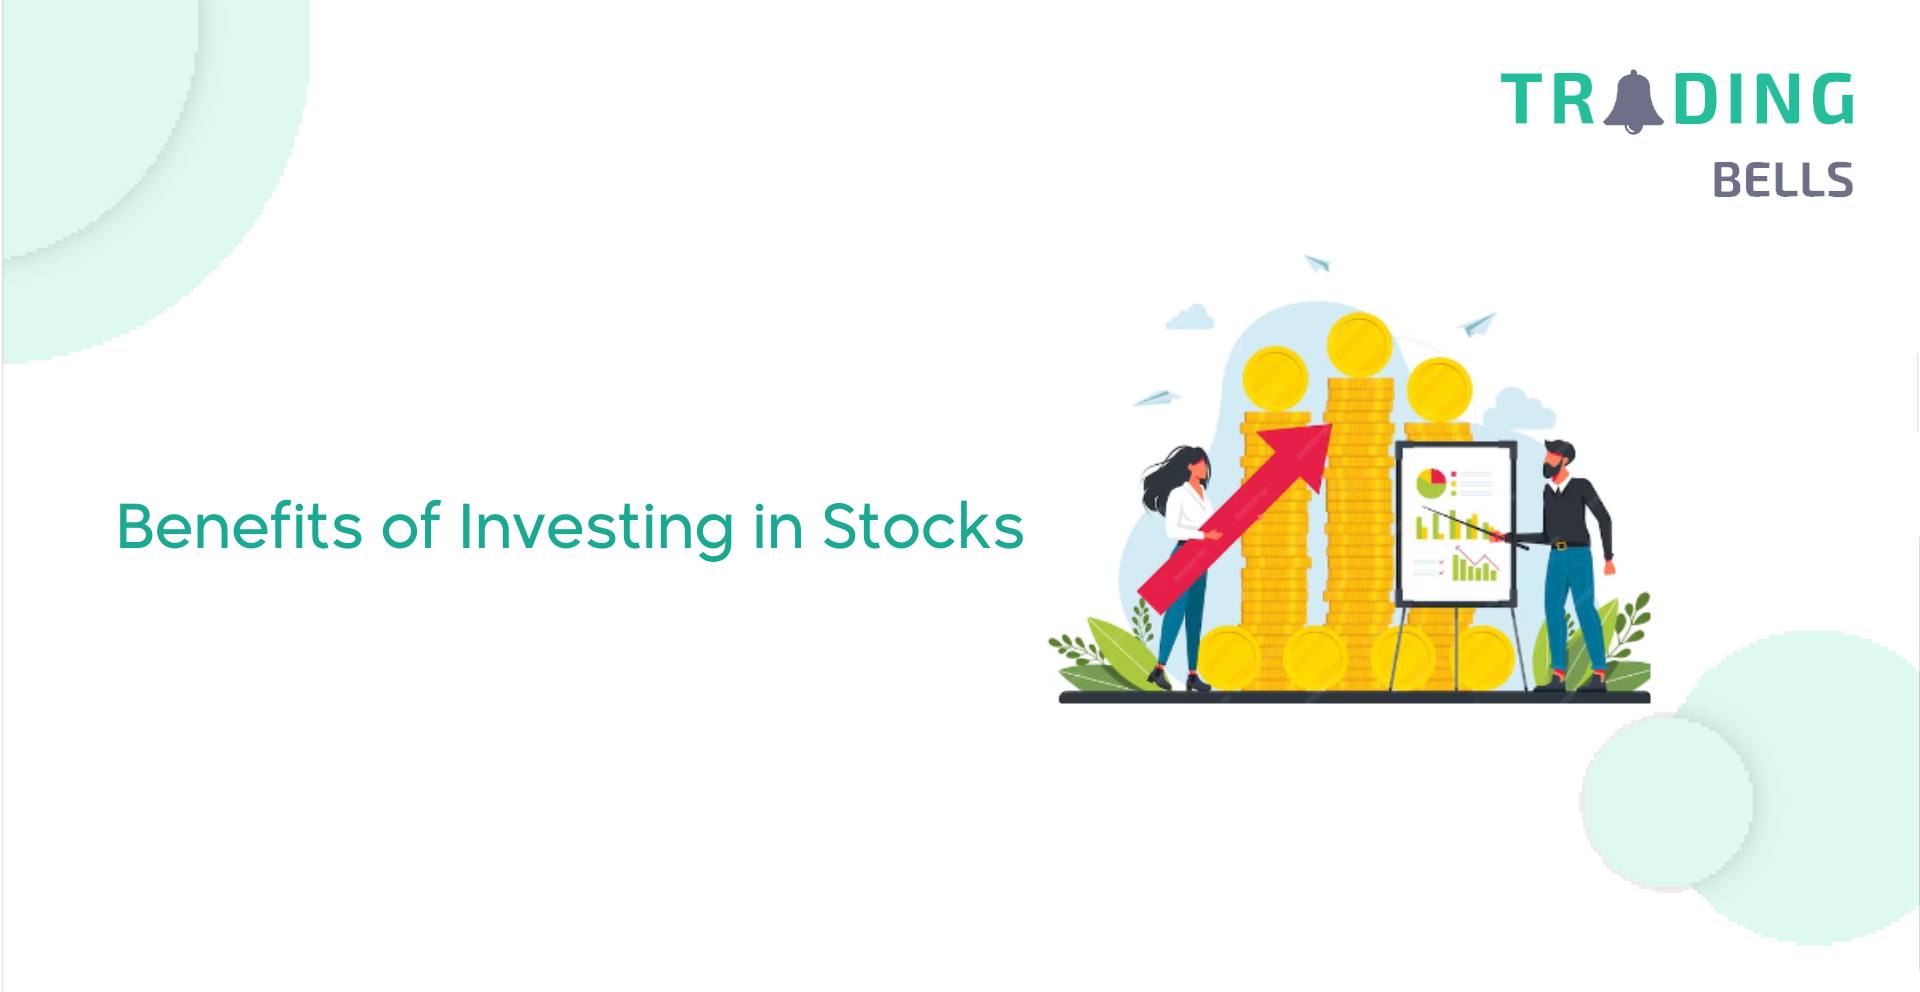 Benefits of Investing in Stocks